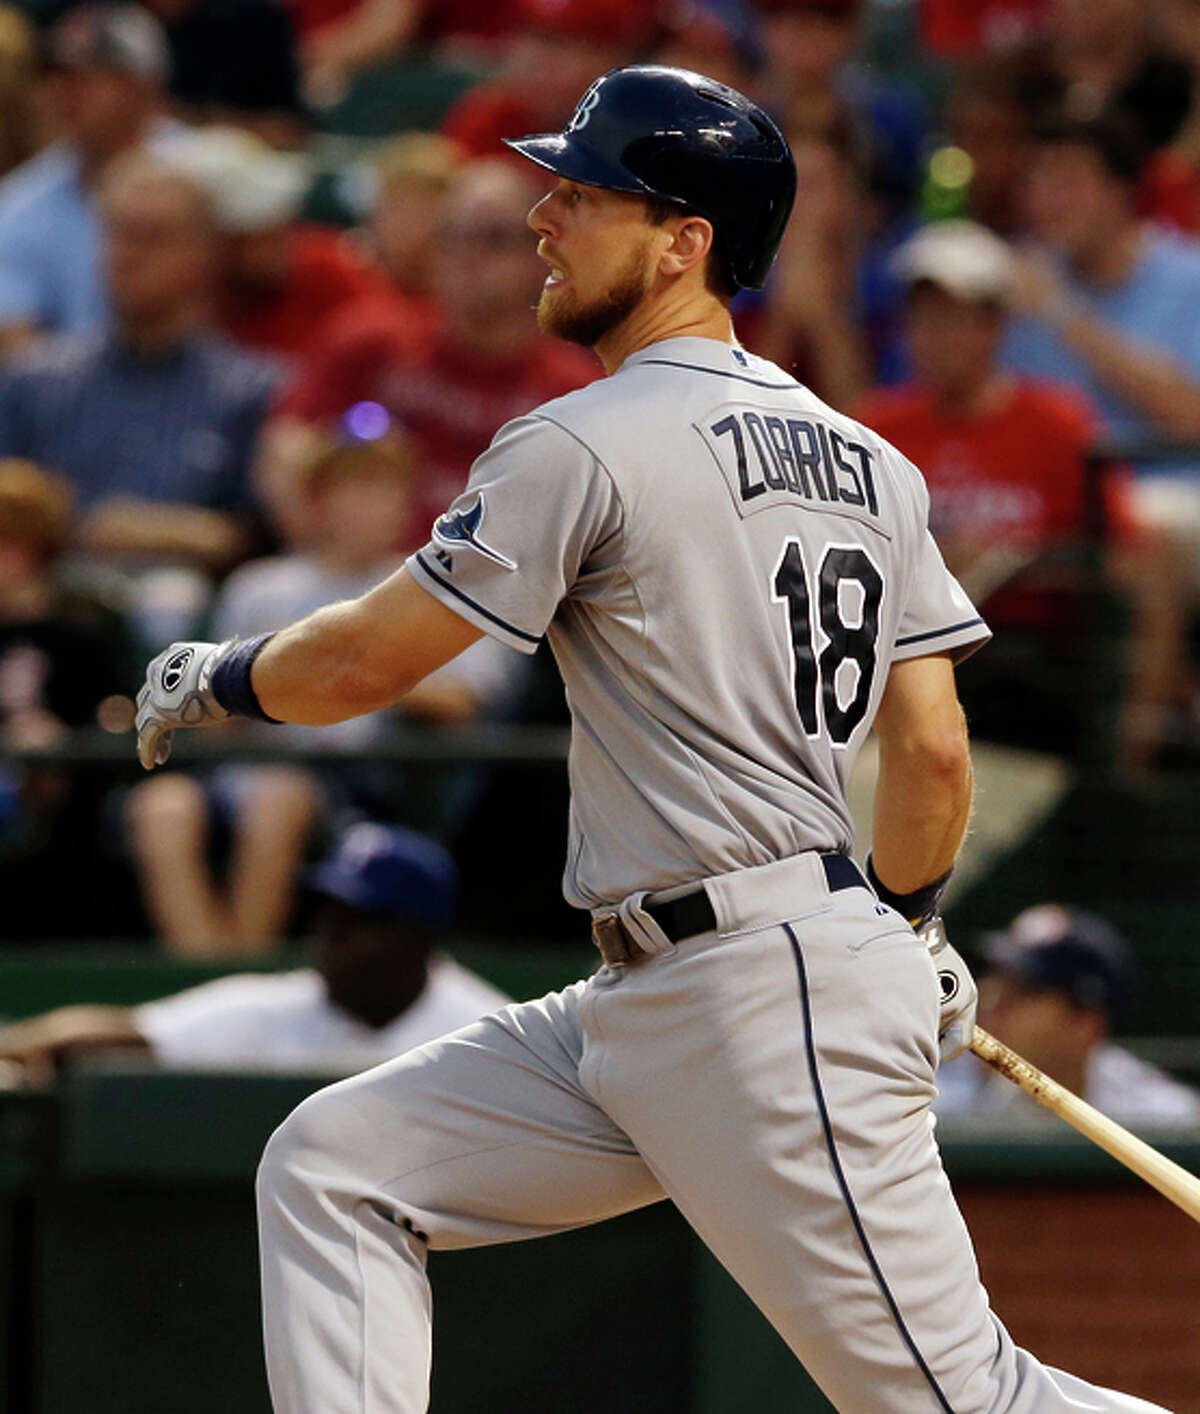 You want versatile? Ben Zobrist has played seven positions in the bigs.